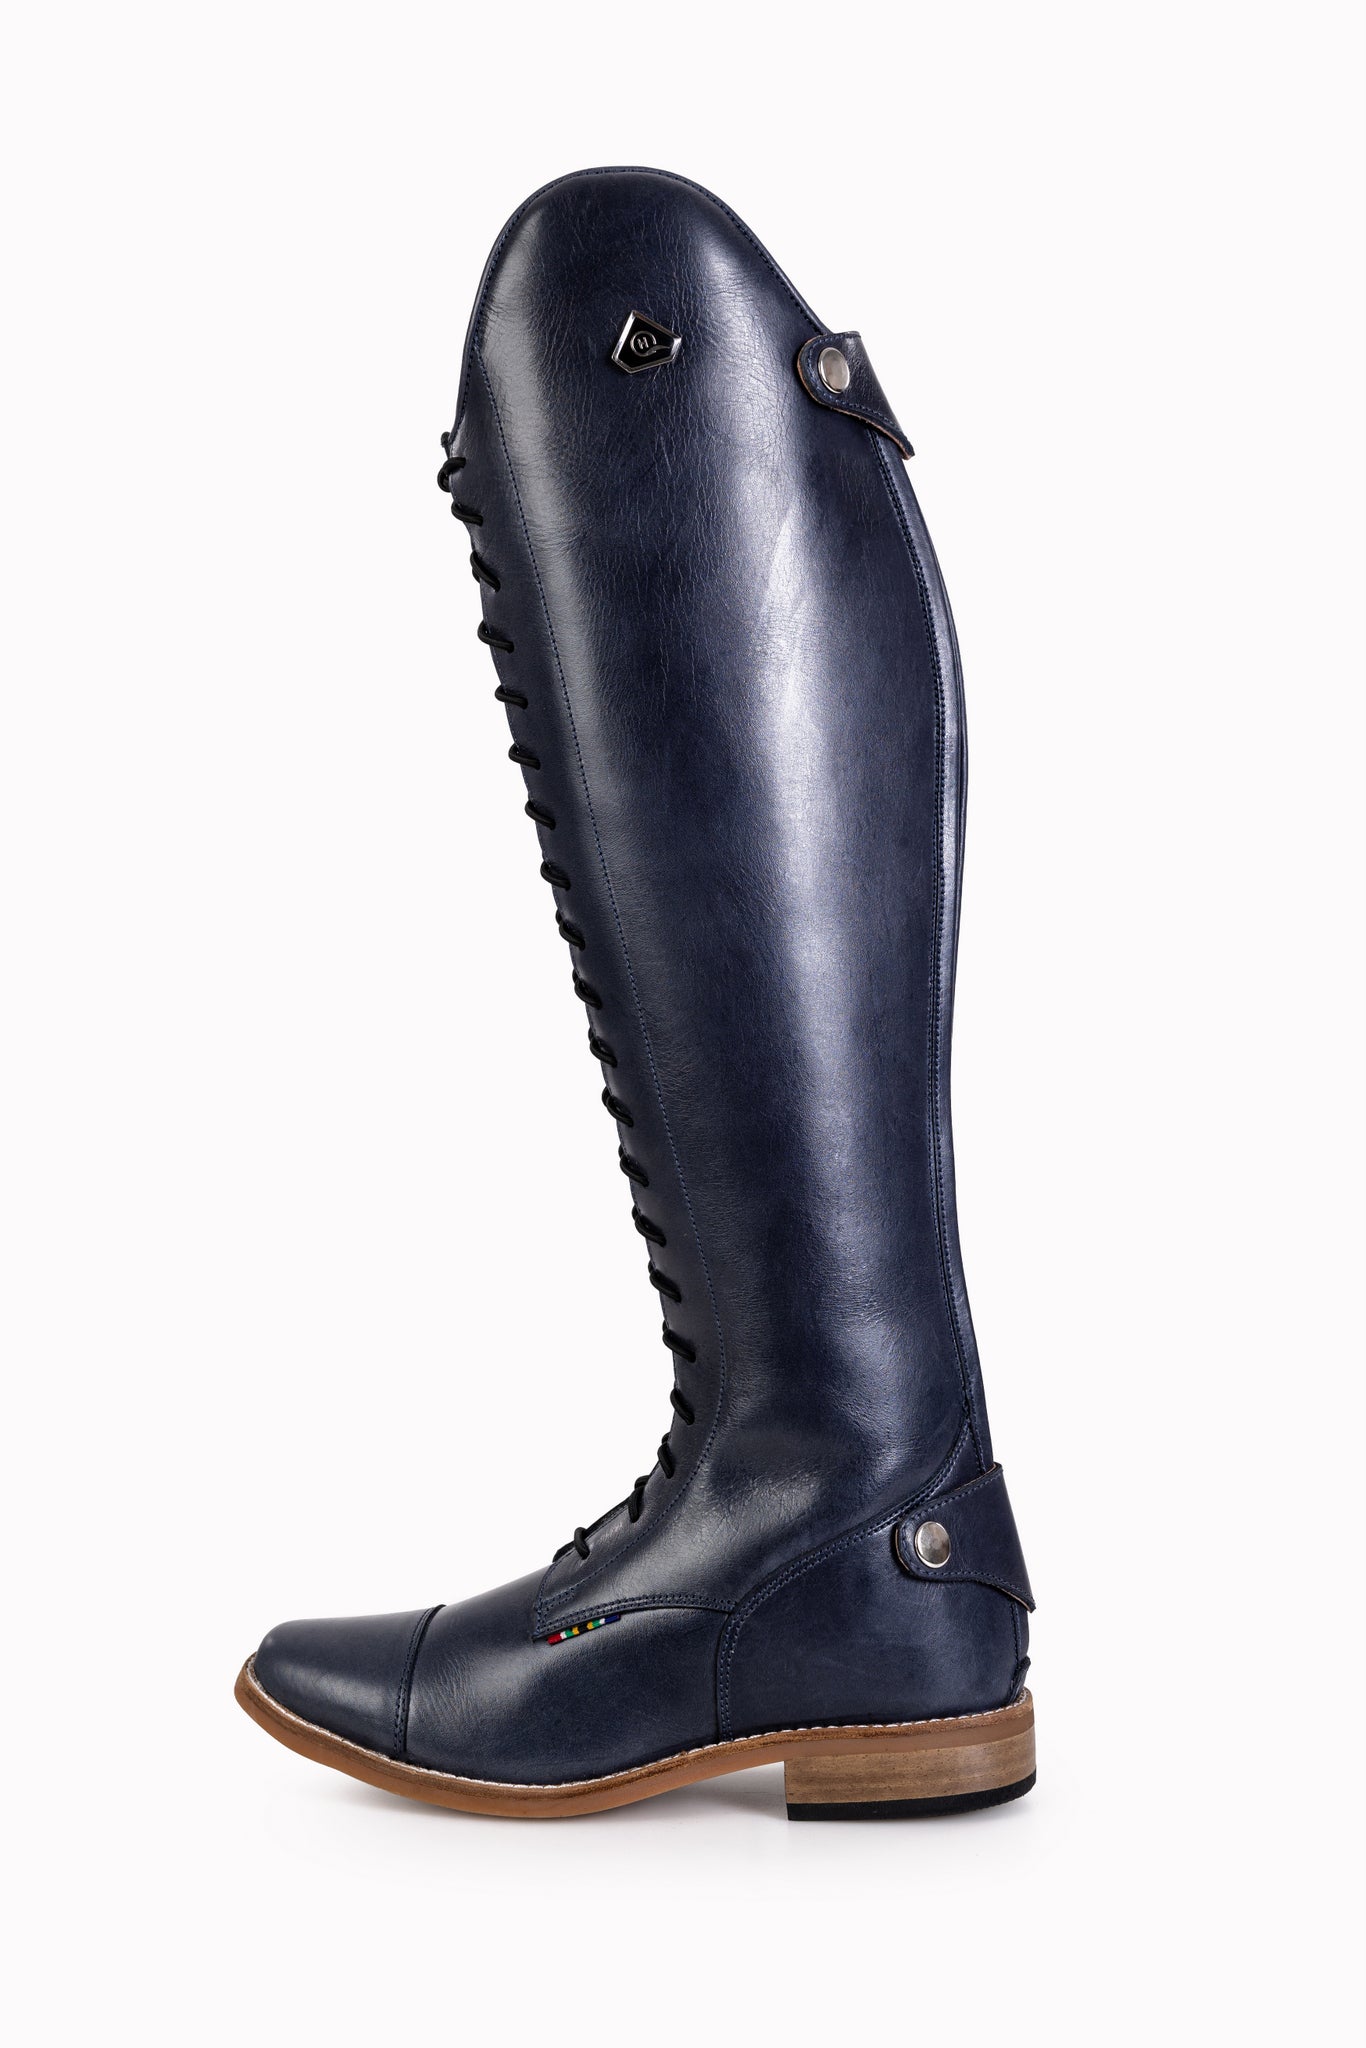 Women's Long Boots | Hello Quality Equestrian